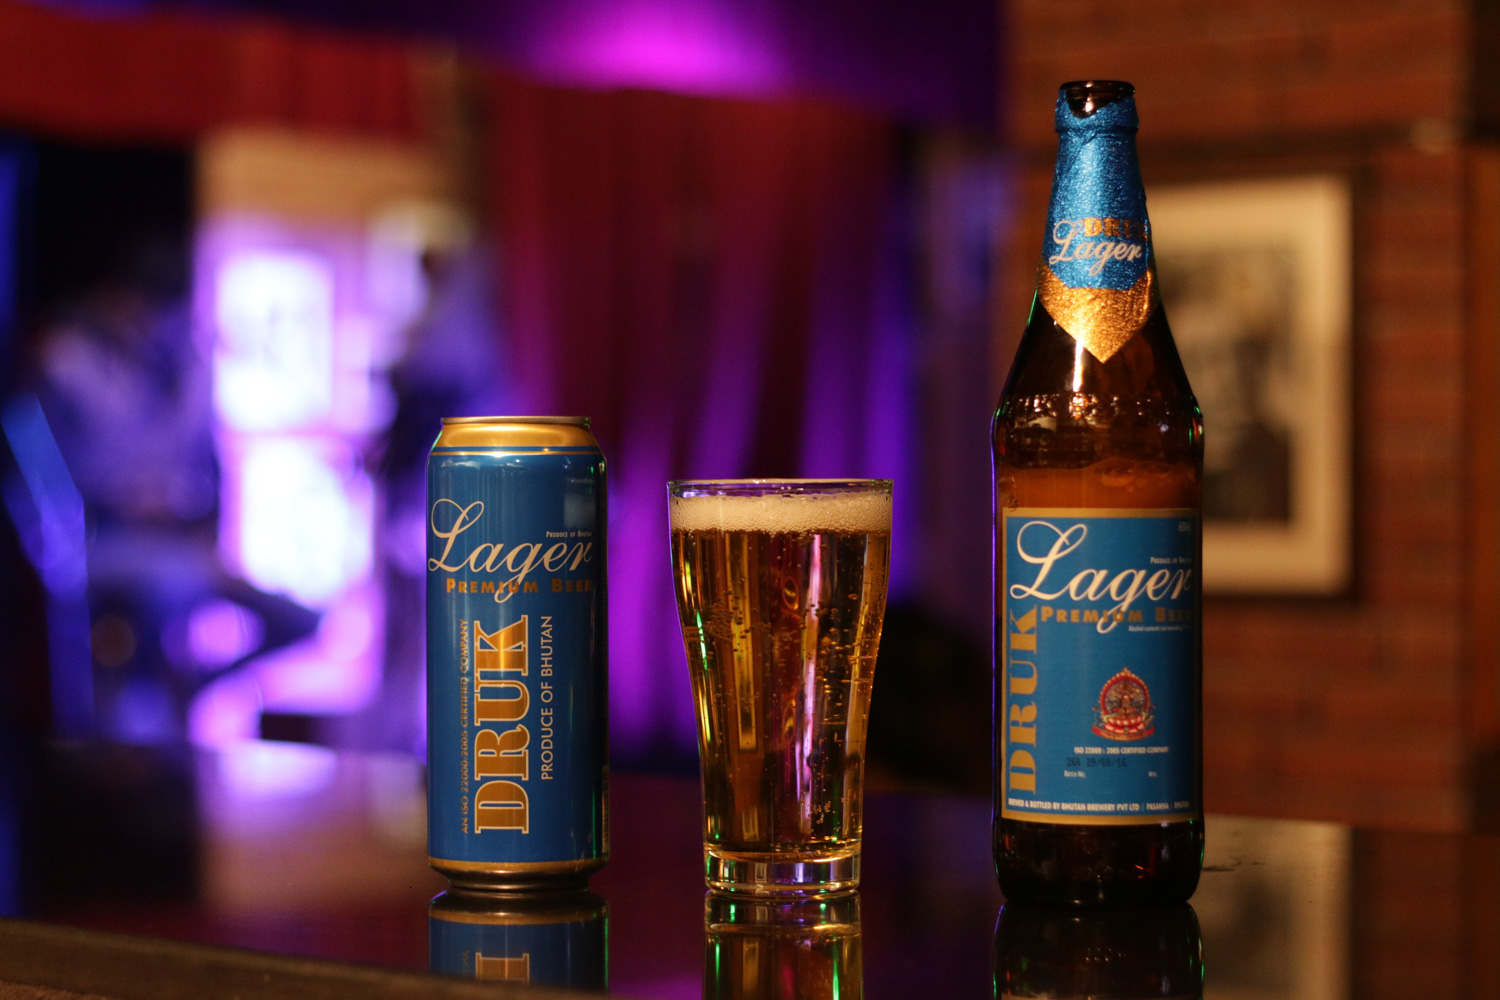 Druk Lager Premium comes in bottle and can